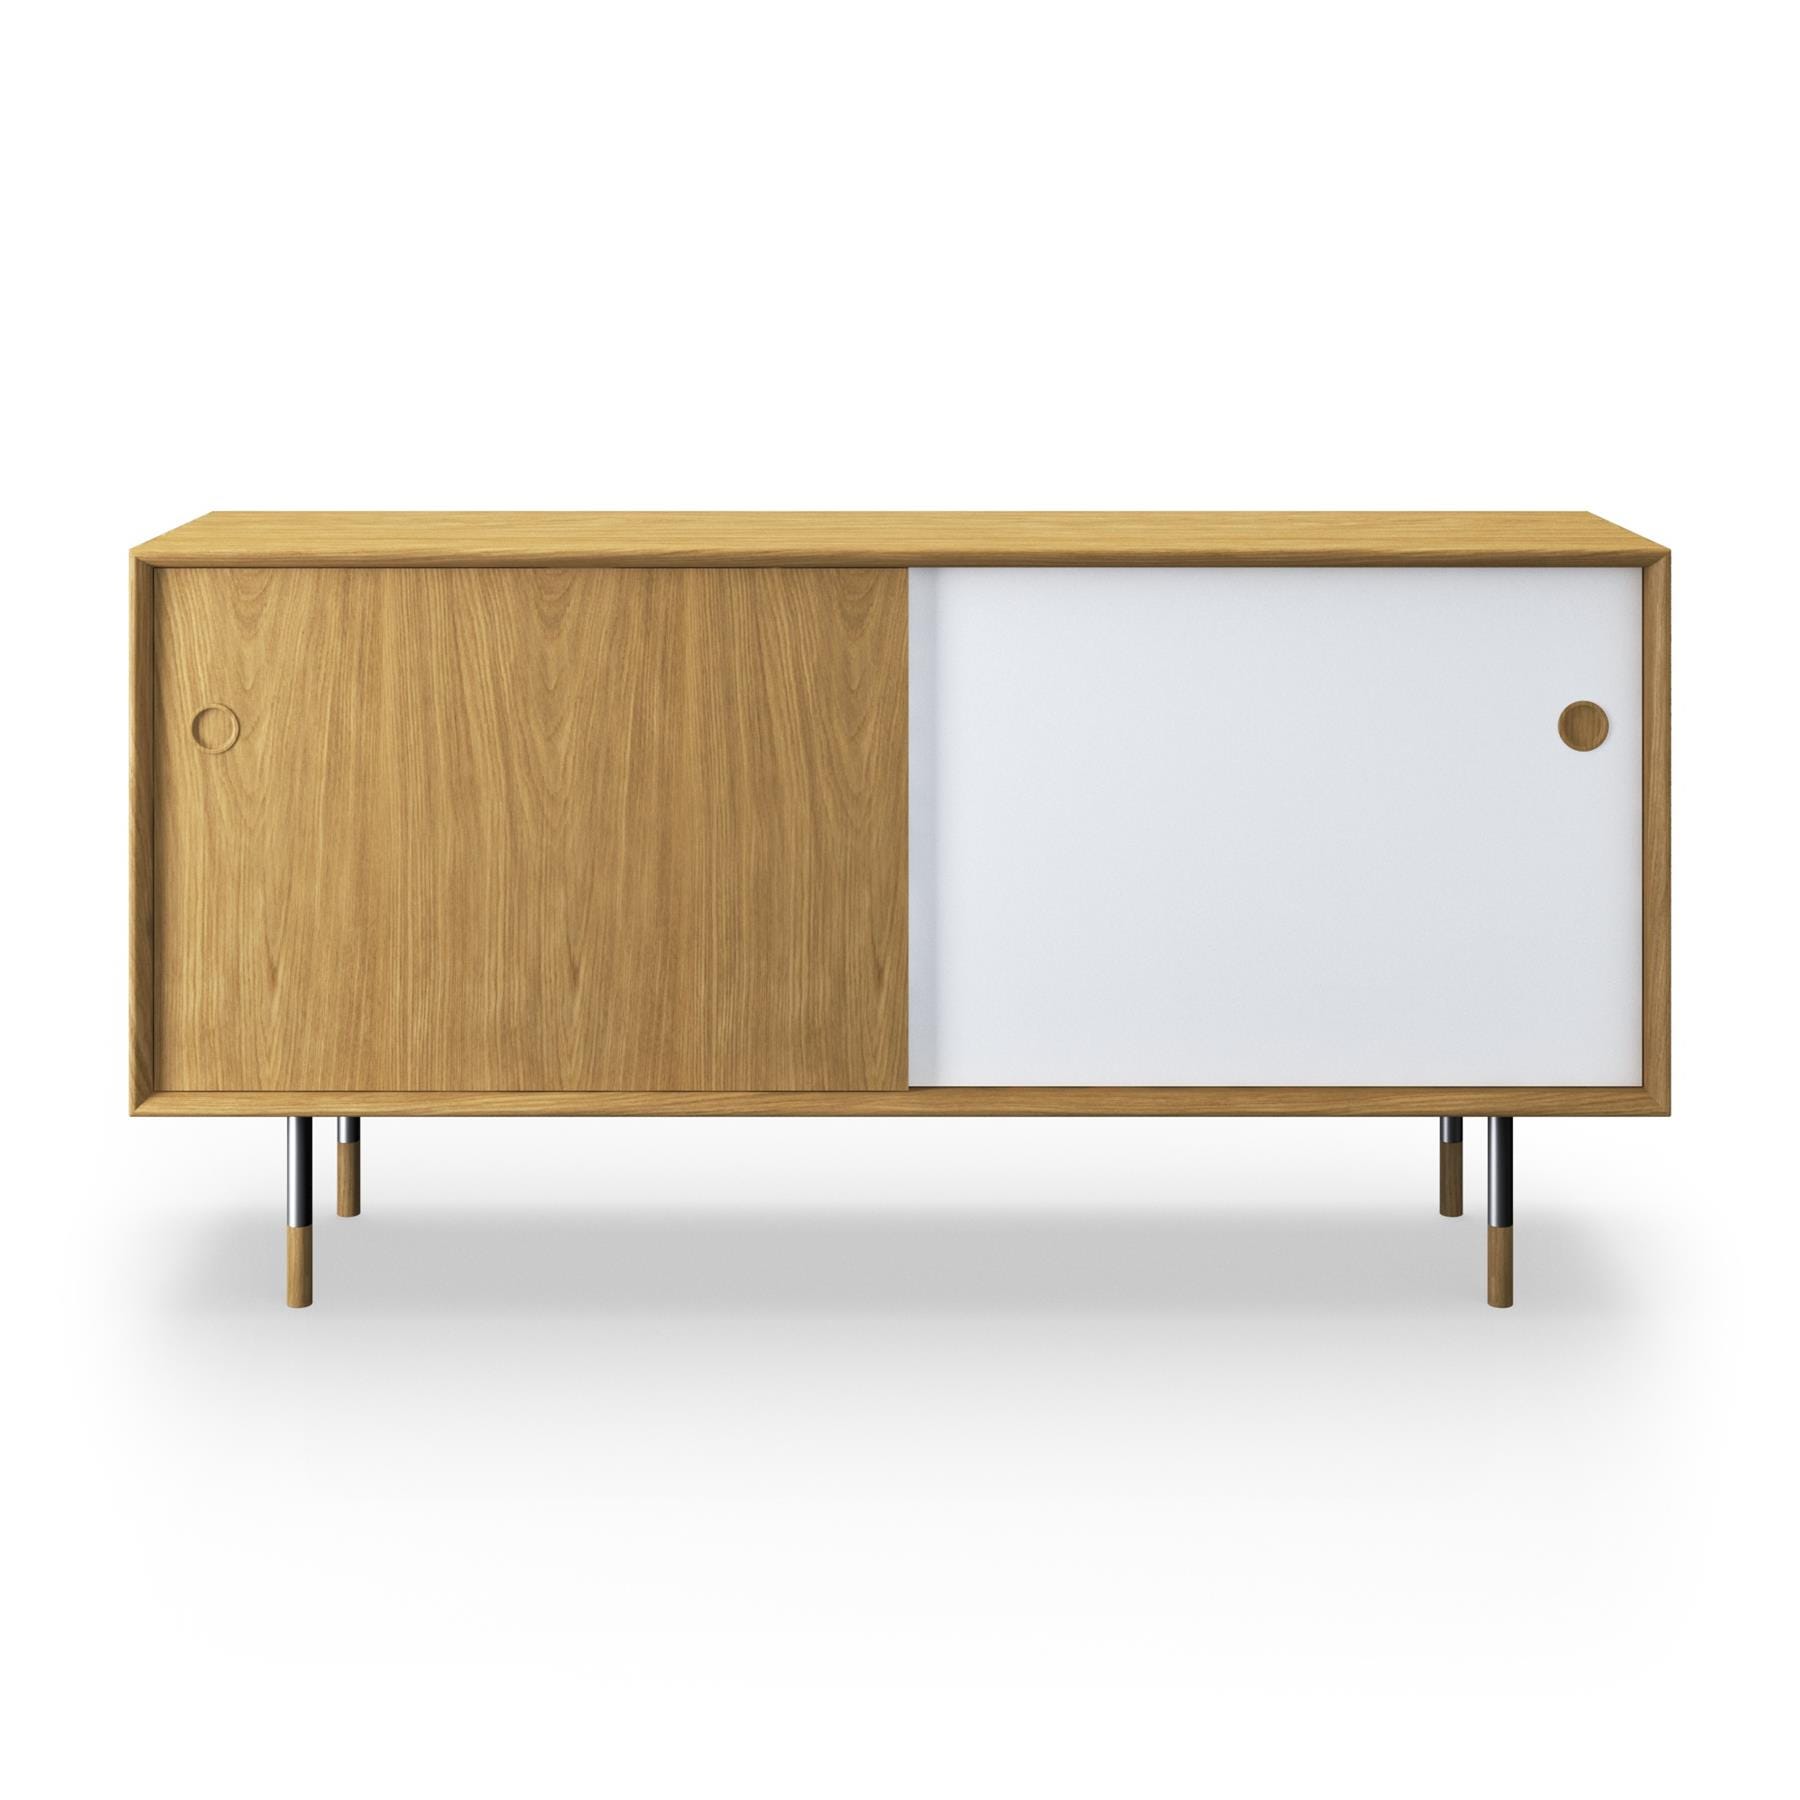 Sibast No 11 Sideboard Natural Oiled Oak White And Natural Front Metal Legs Light Wood Designer Furniture From Holloways Of Ludlow